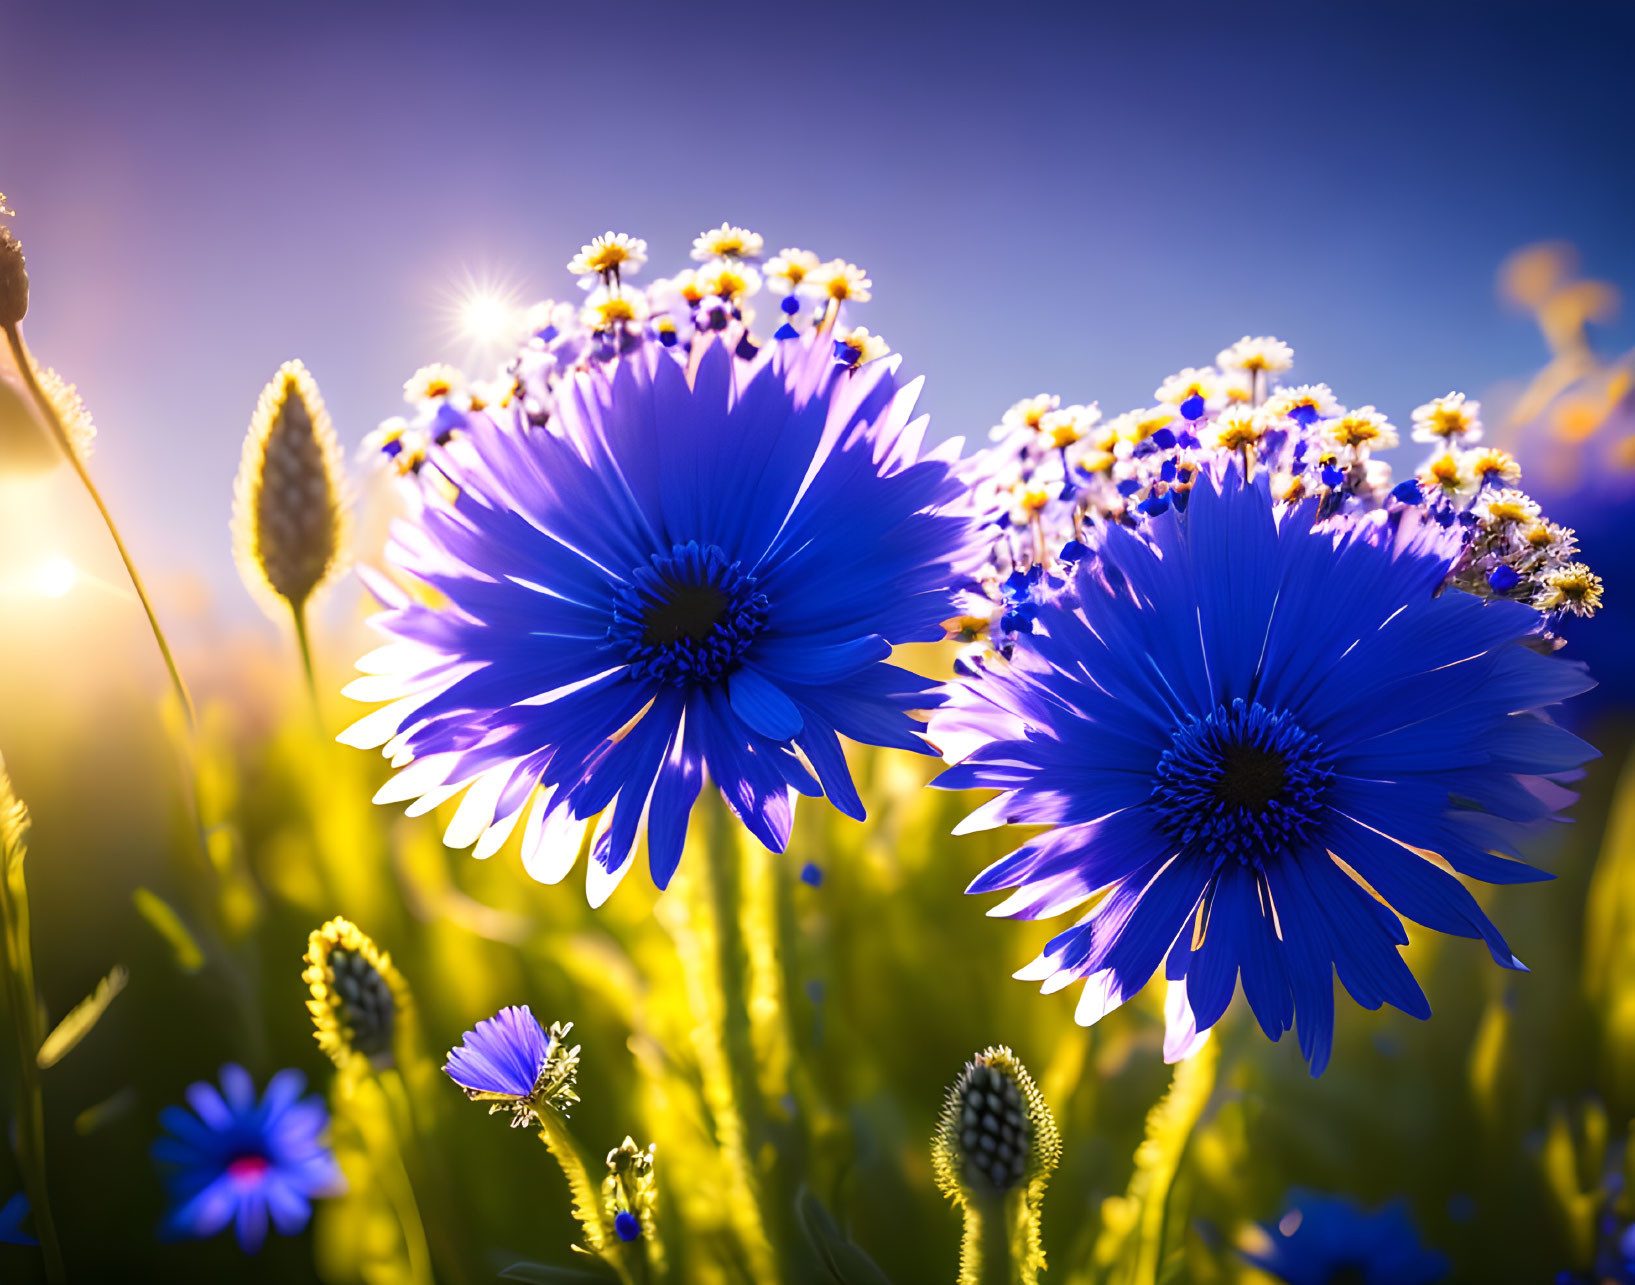 Bright Blue Flowers Blooming Against Golden Sunset